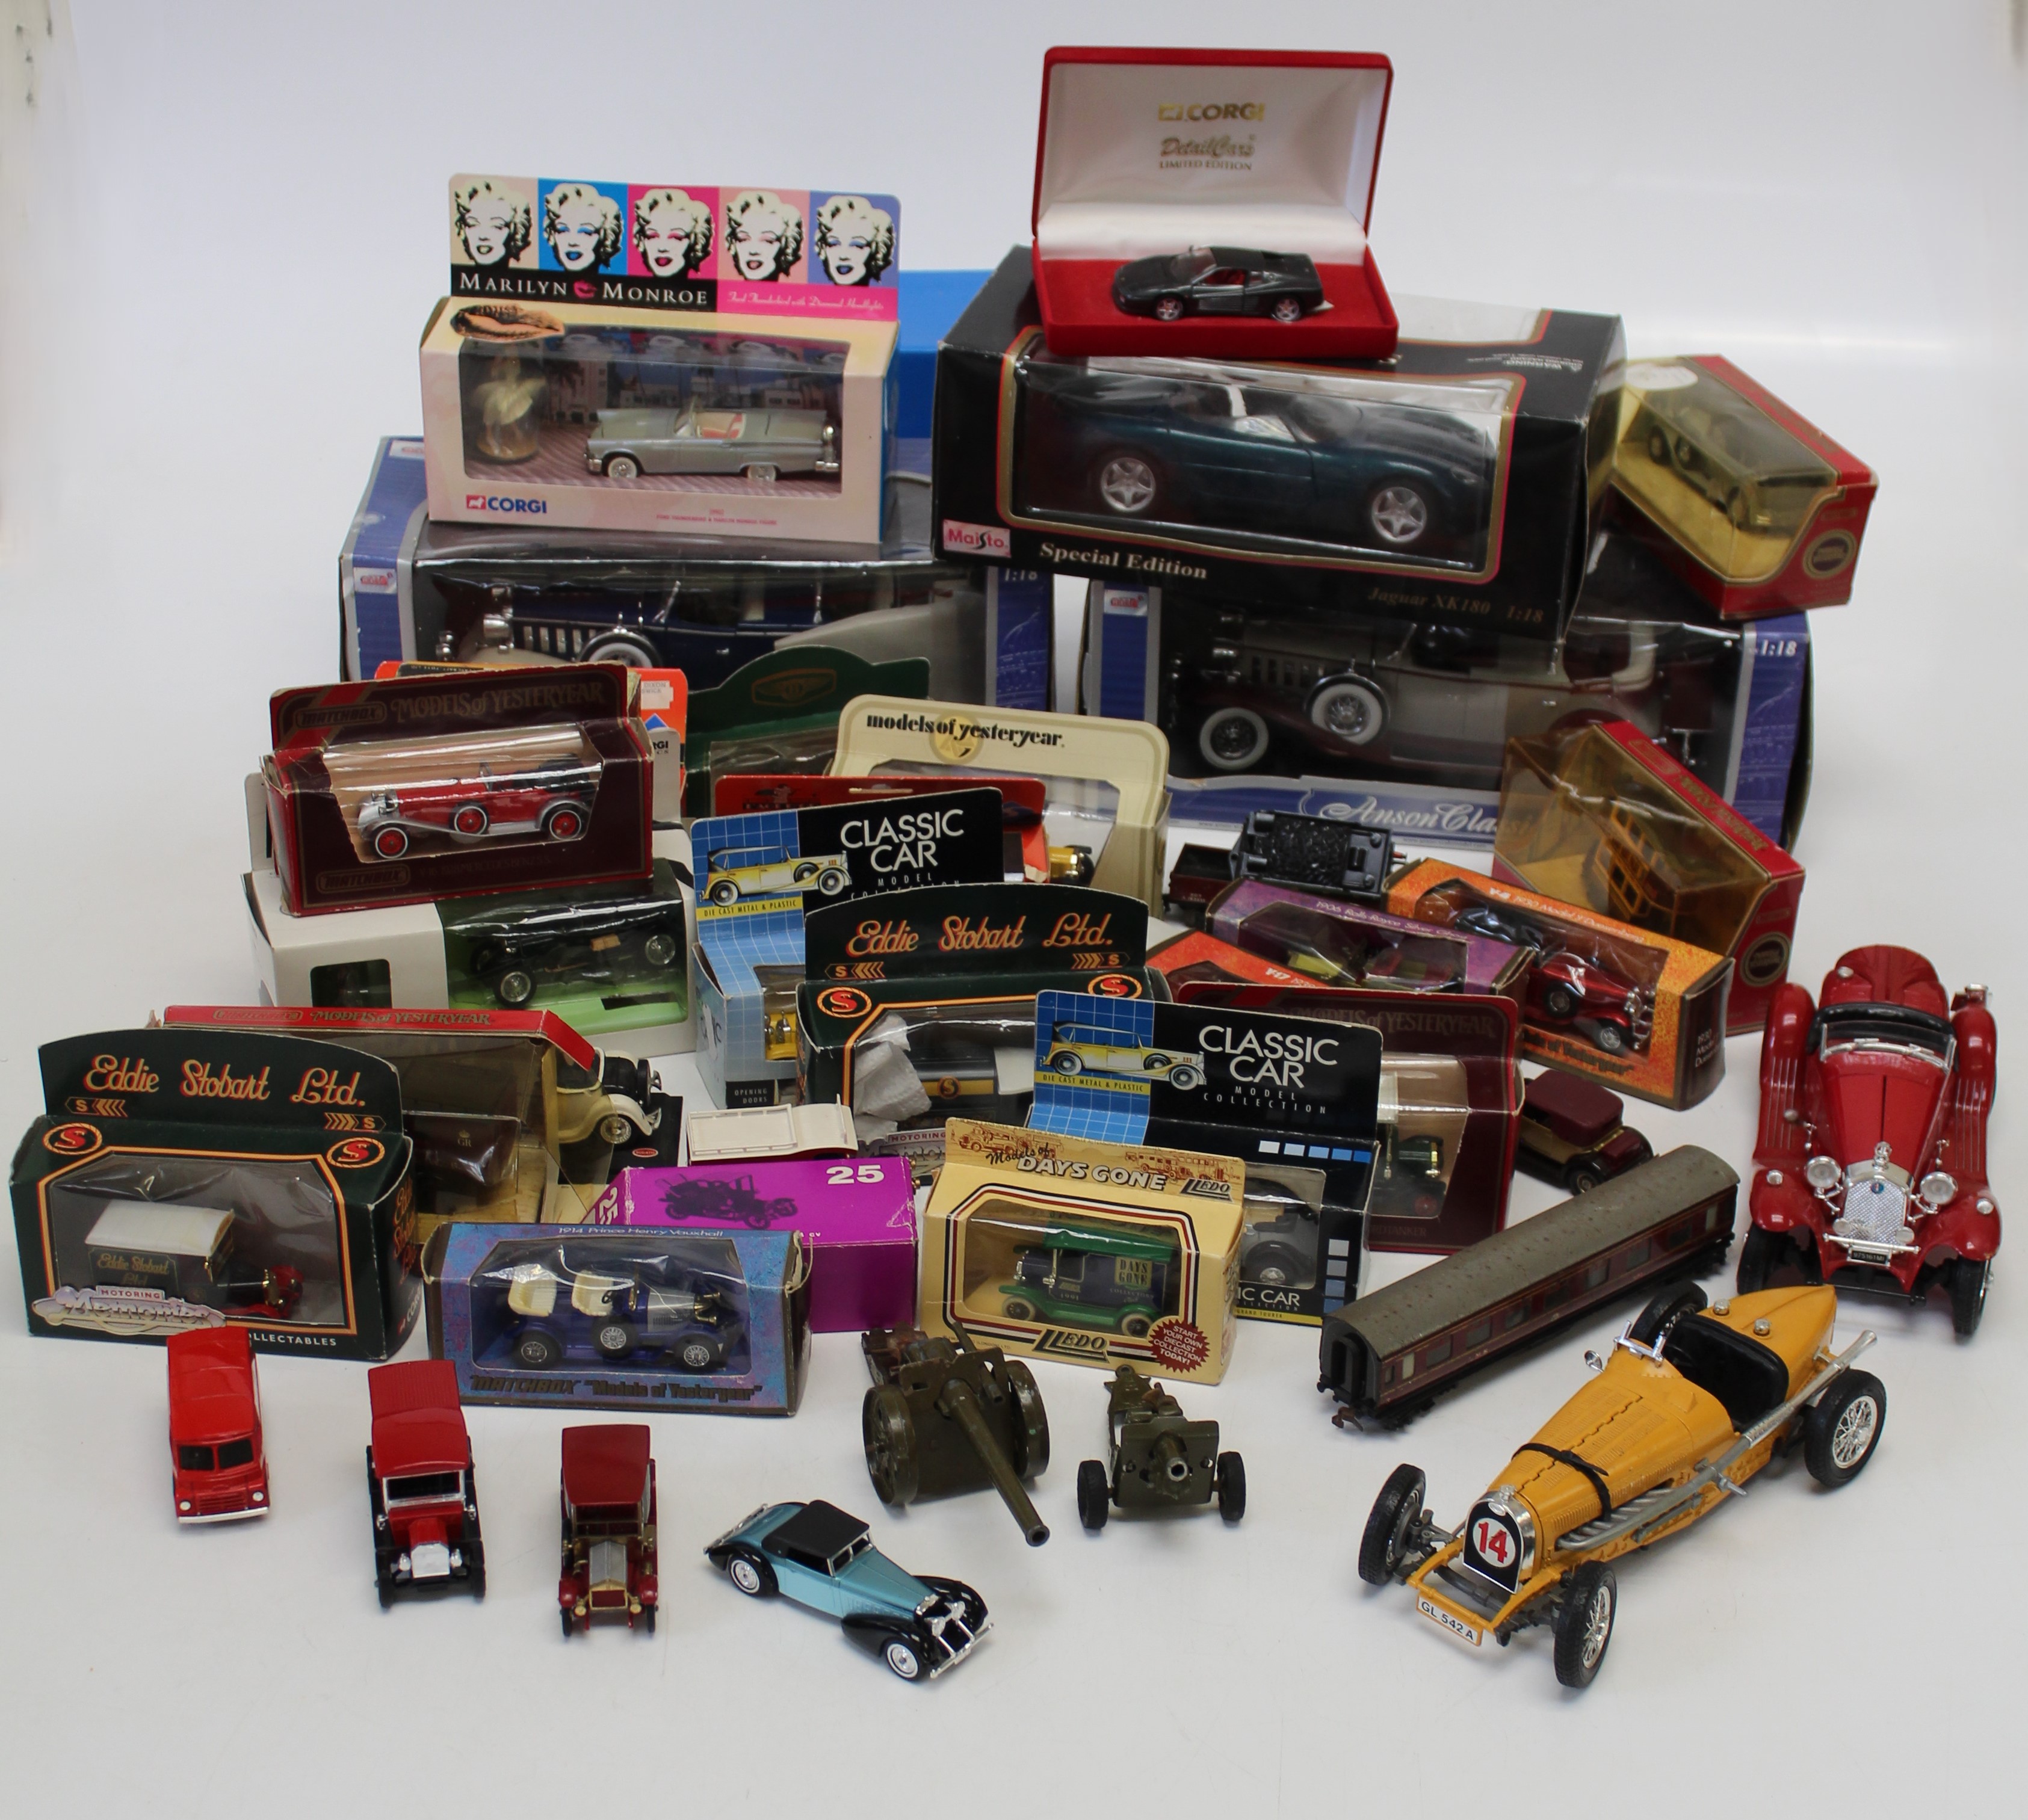 A large collection of die cast model vehicles, to include Days Gone, Models of Yesteryear, Corgi,